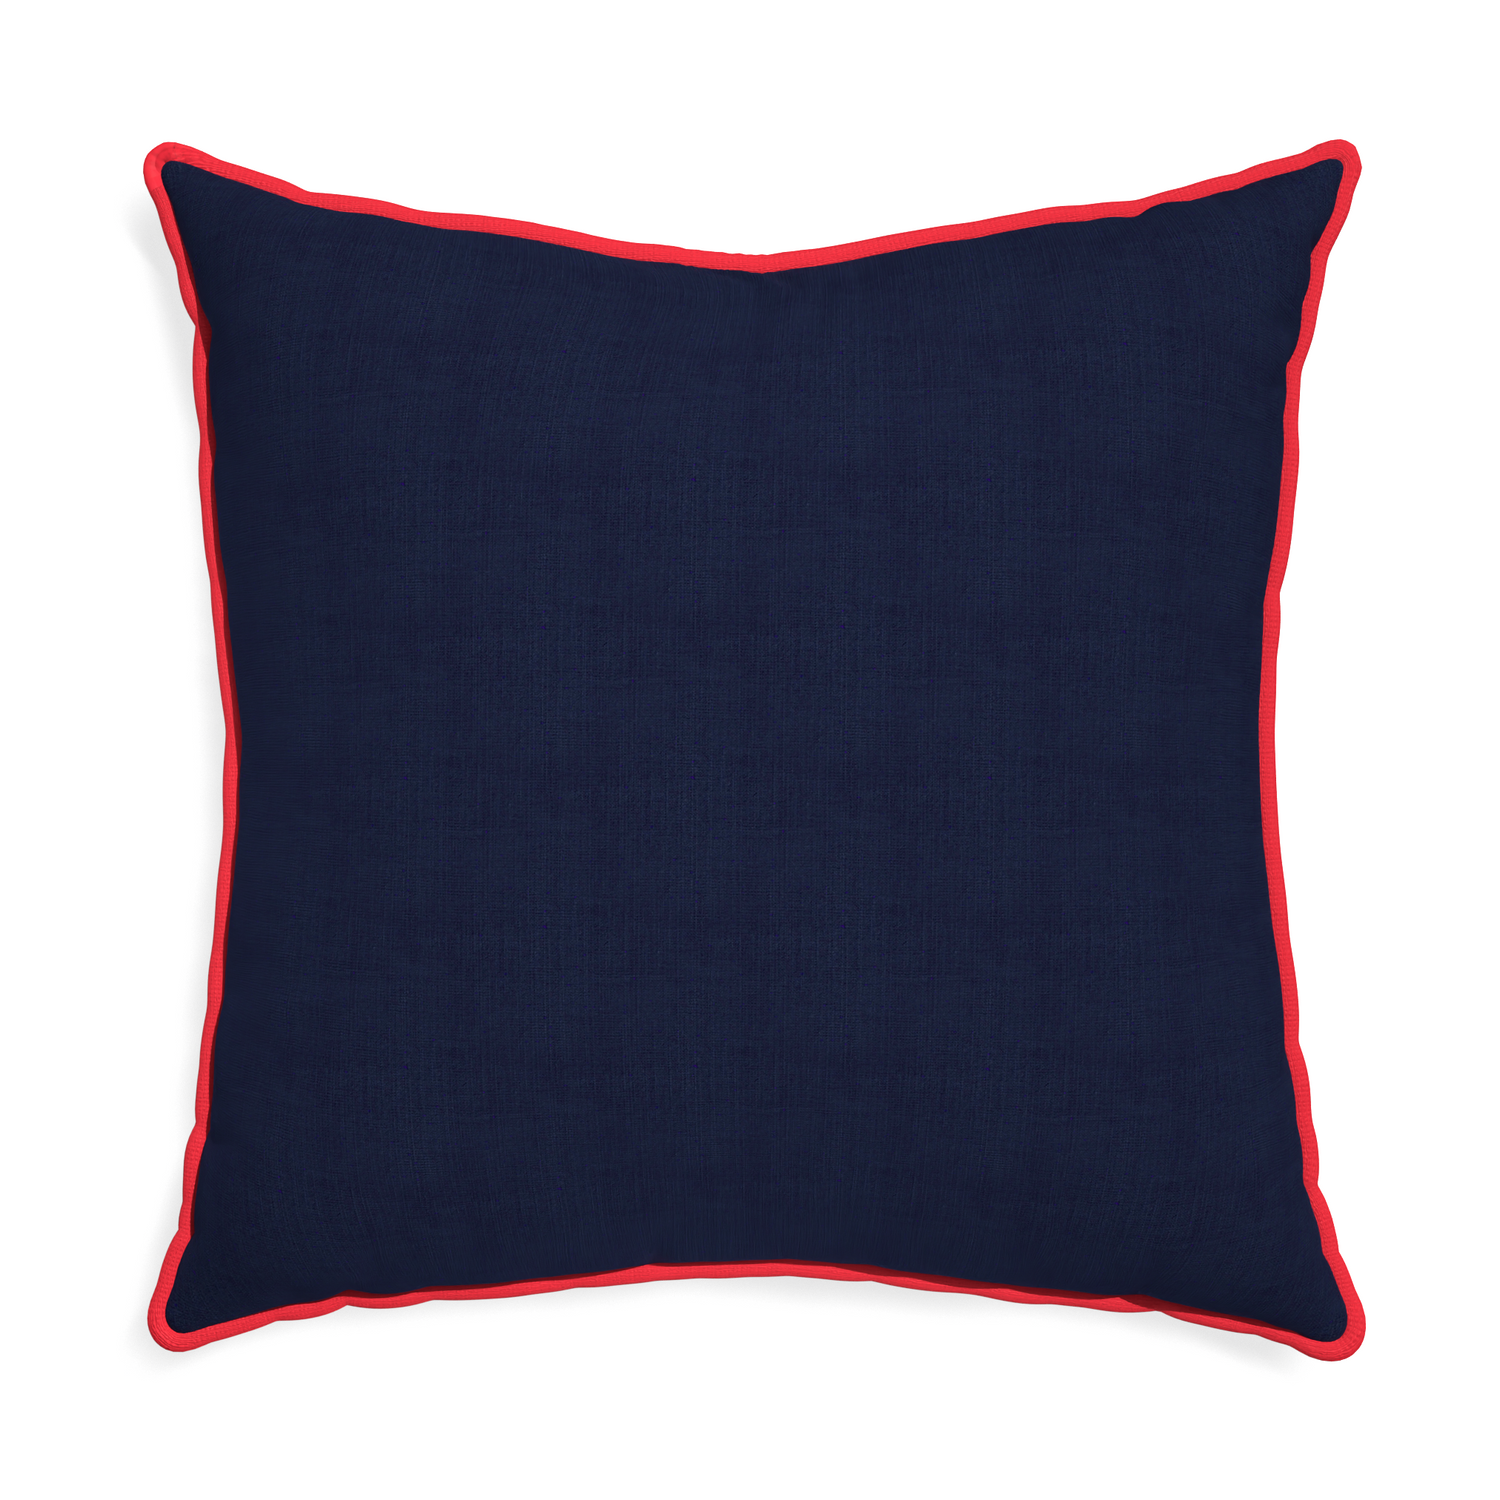 Euro-sham midnight custom navy bluepillow with cherry piping on white background